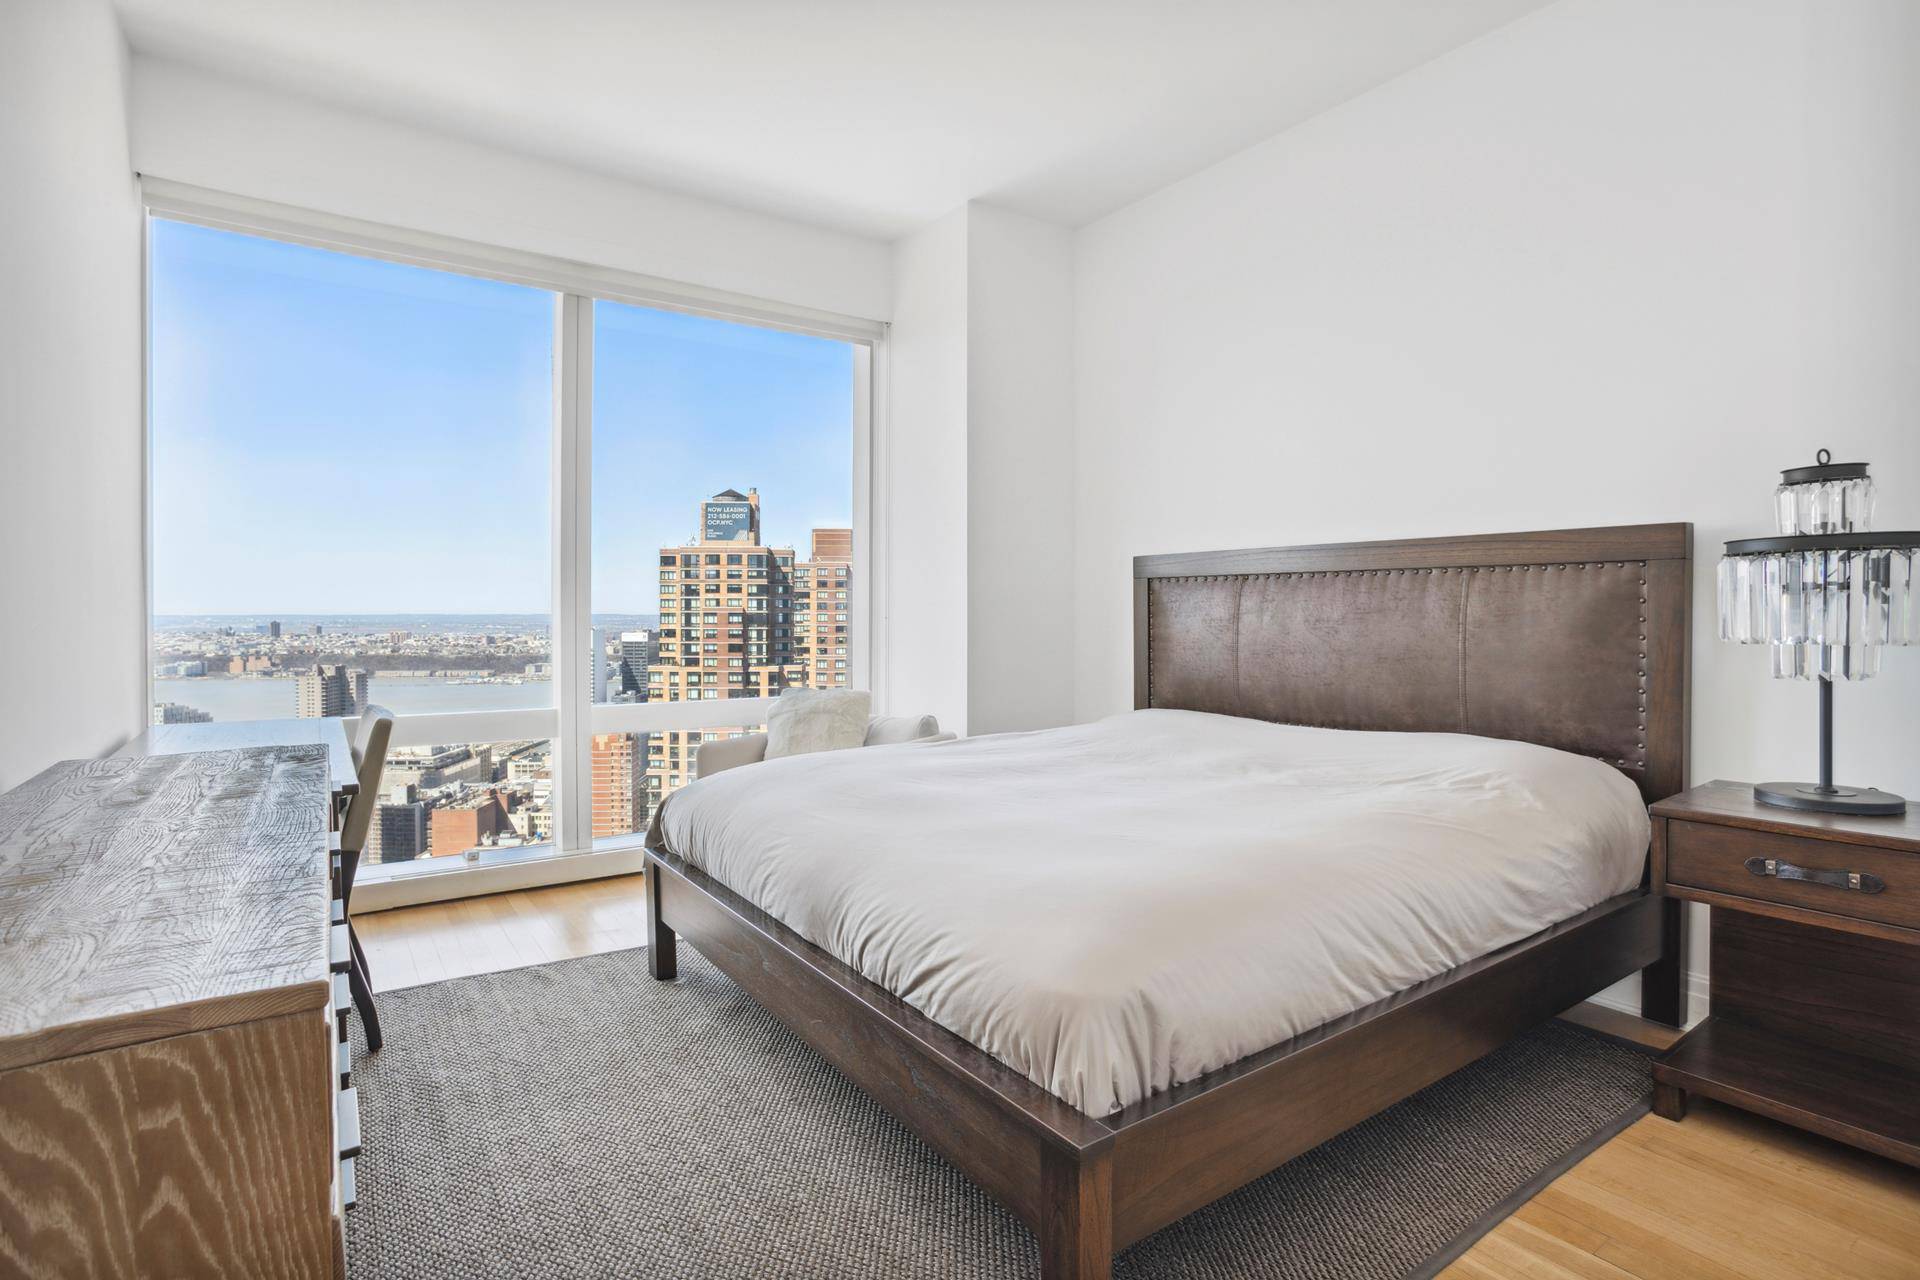 Spectacular Panoramic Hudson River View amp ; City Views provide you with amazing magical light from every floor to ceiling wall window.